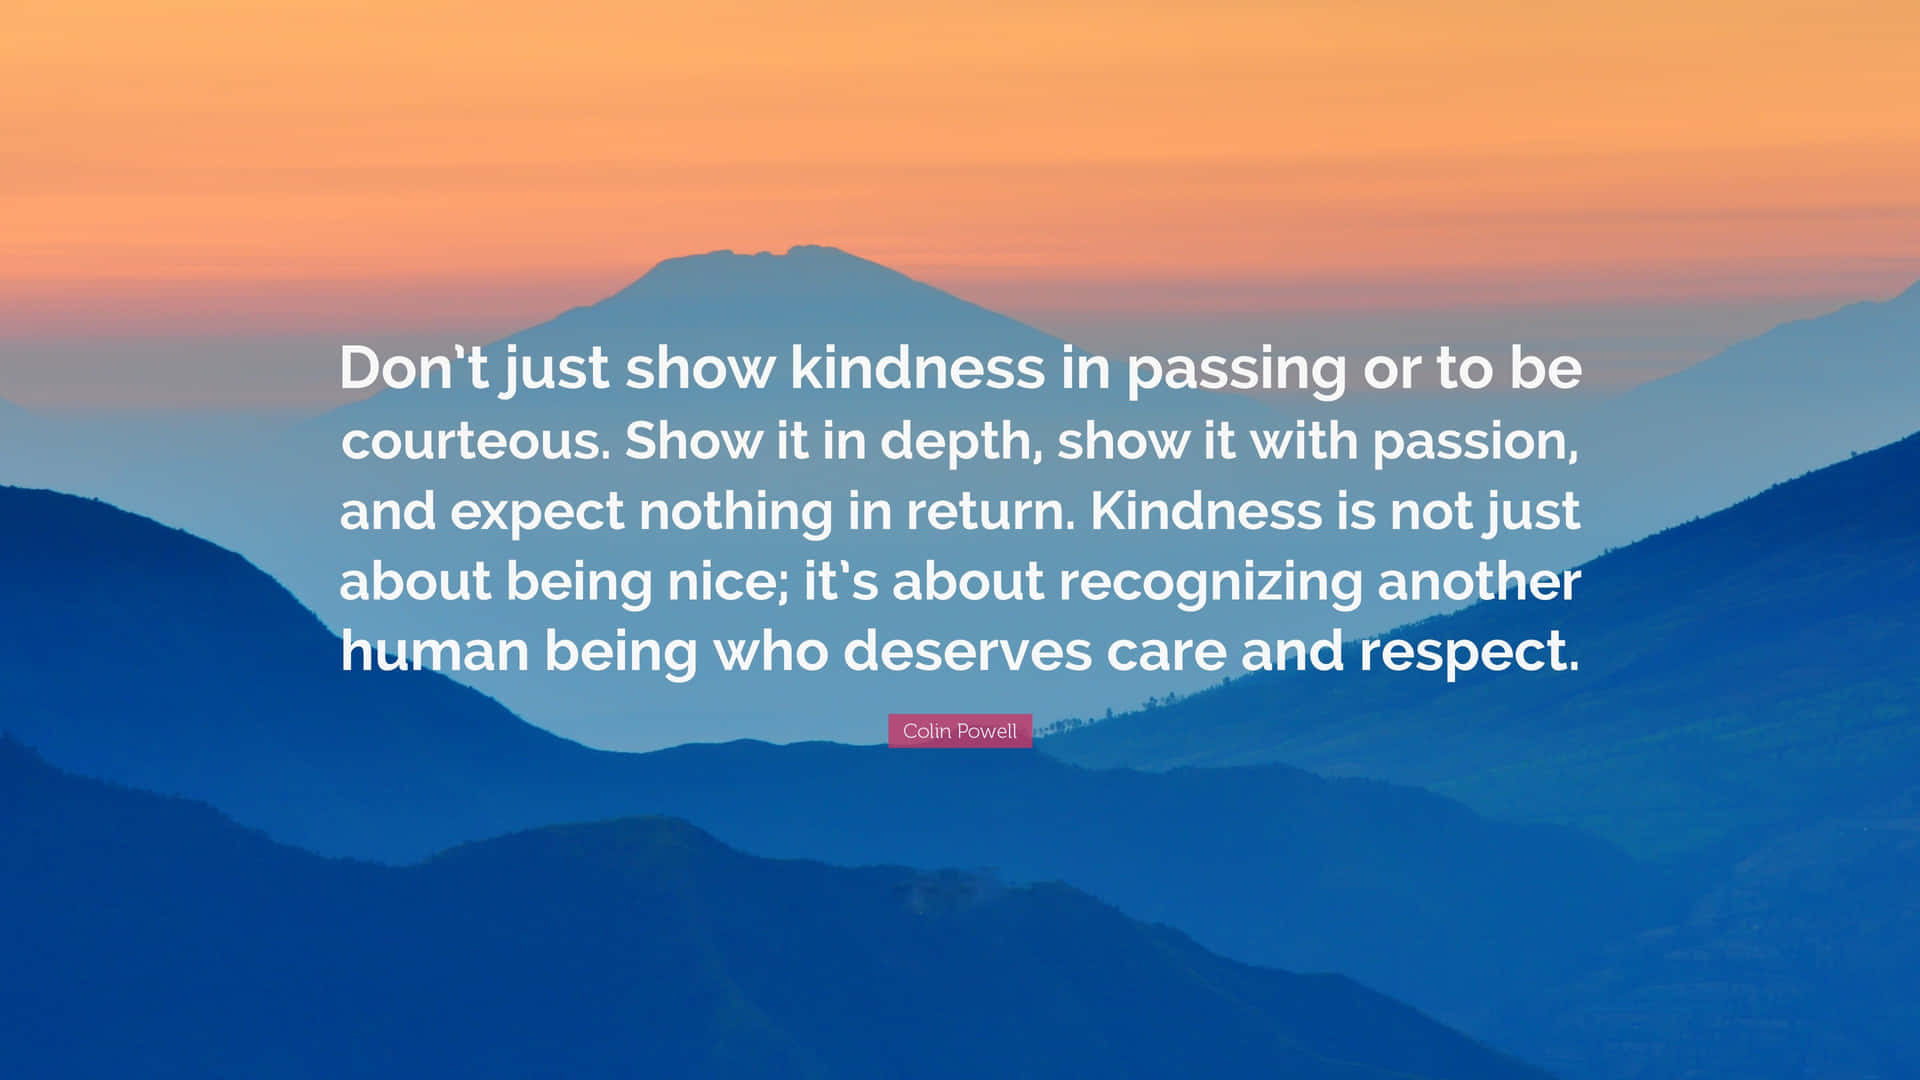 Don't Just Show Kindness In Passing Wallpaper